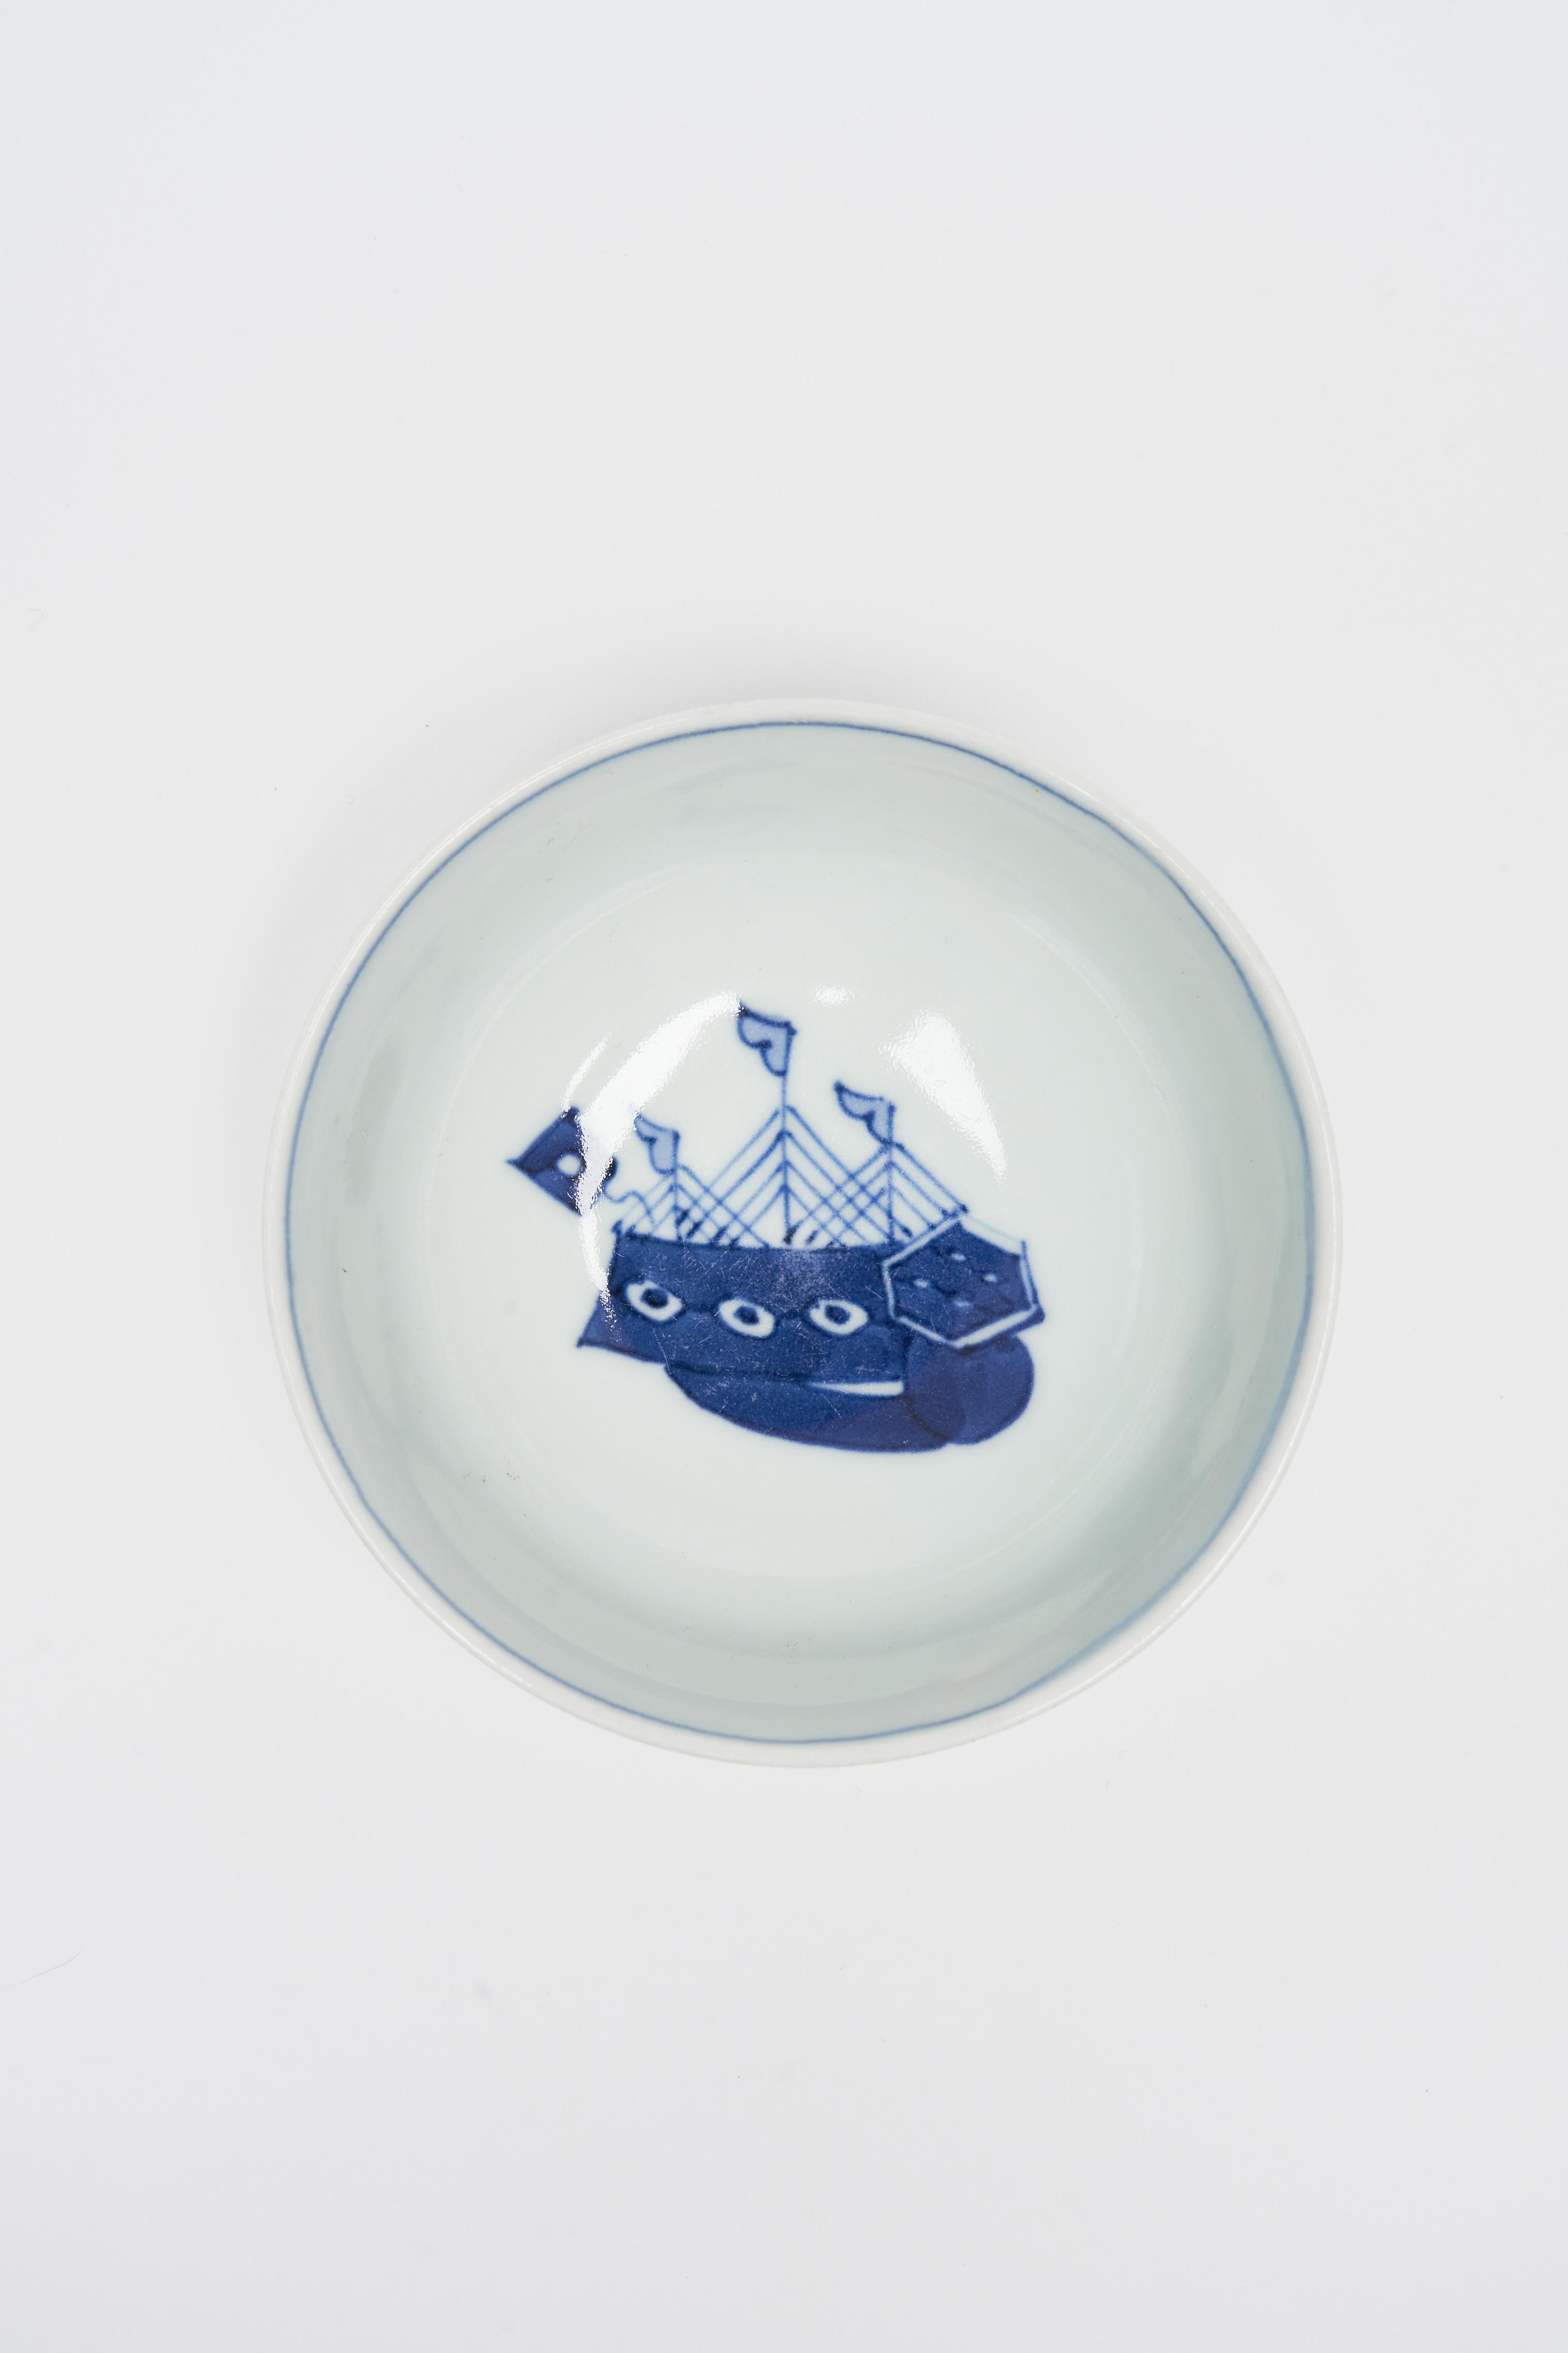 Mid-20th Century Antique 20th Century Japanese Porcelain Bowl with Boat Motif For Sale